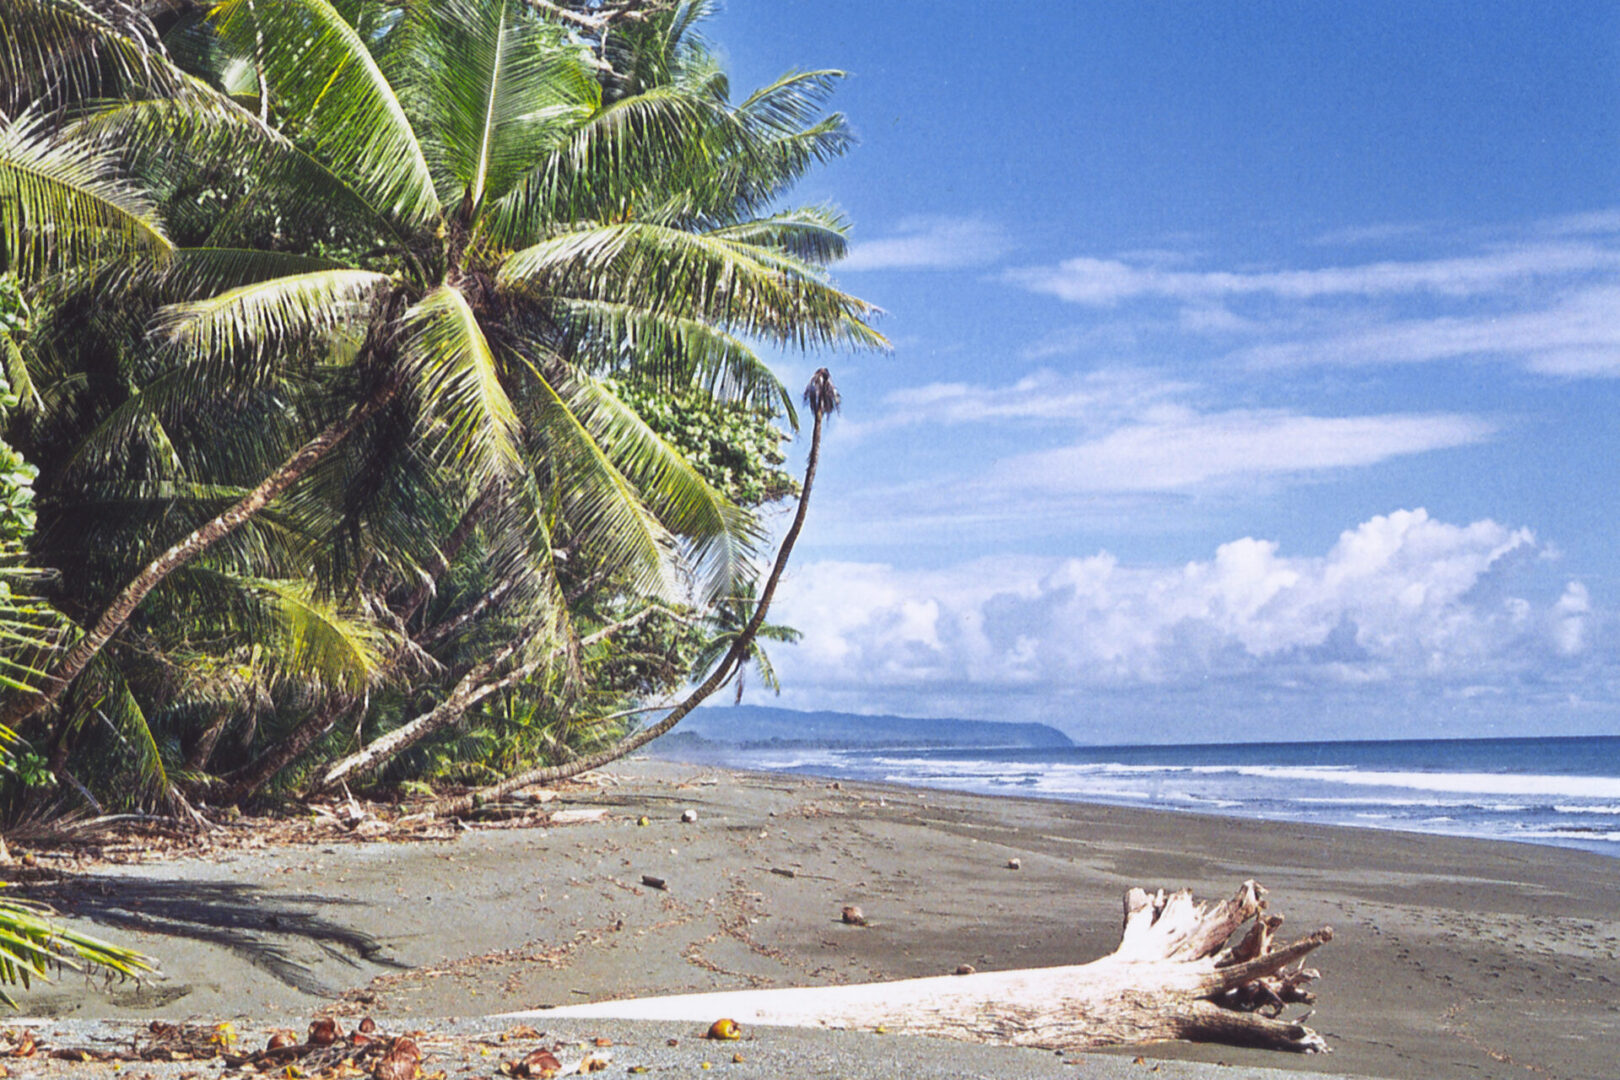 A beach with palm trees and waves in the background.